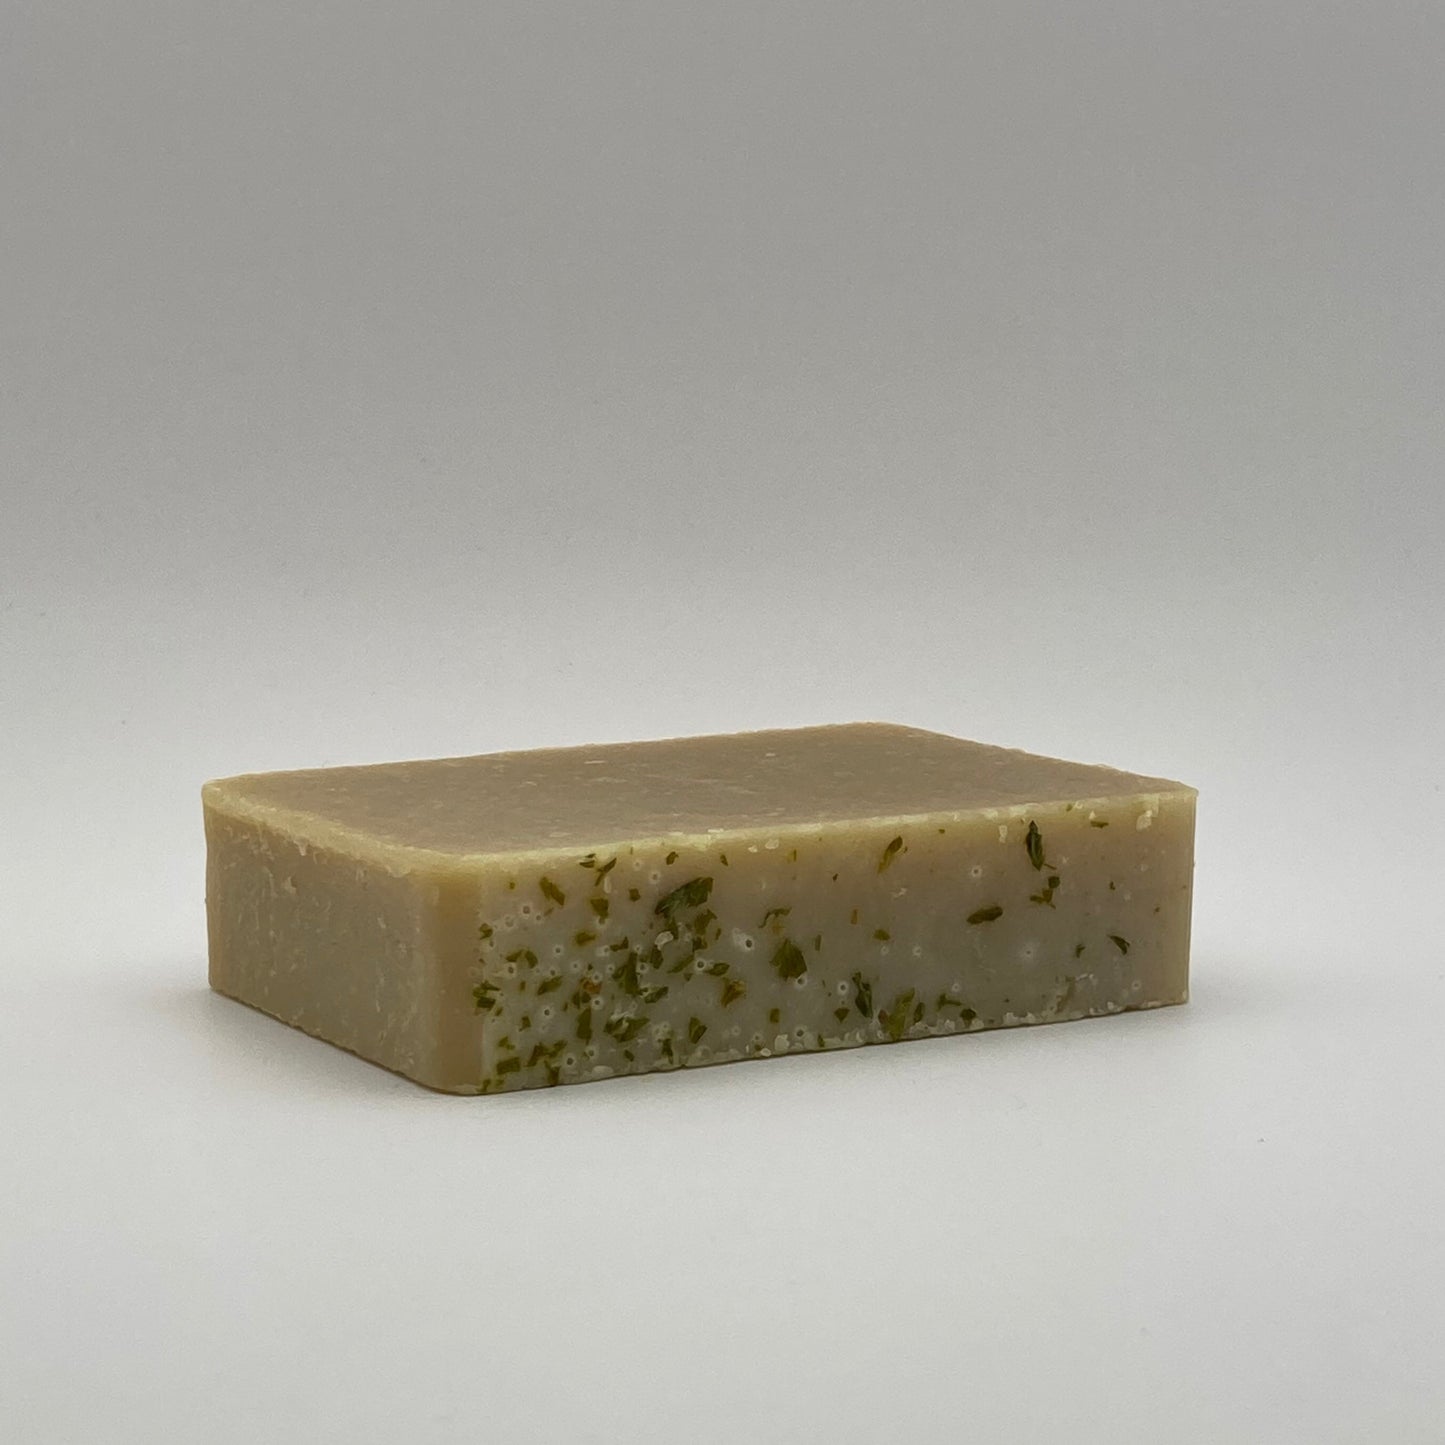 The Itchy Goat Milk Soap Bar